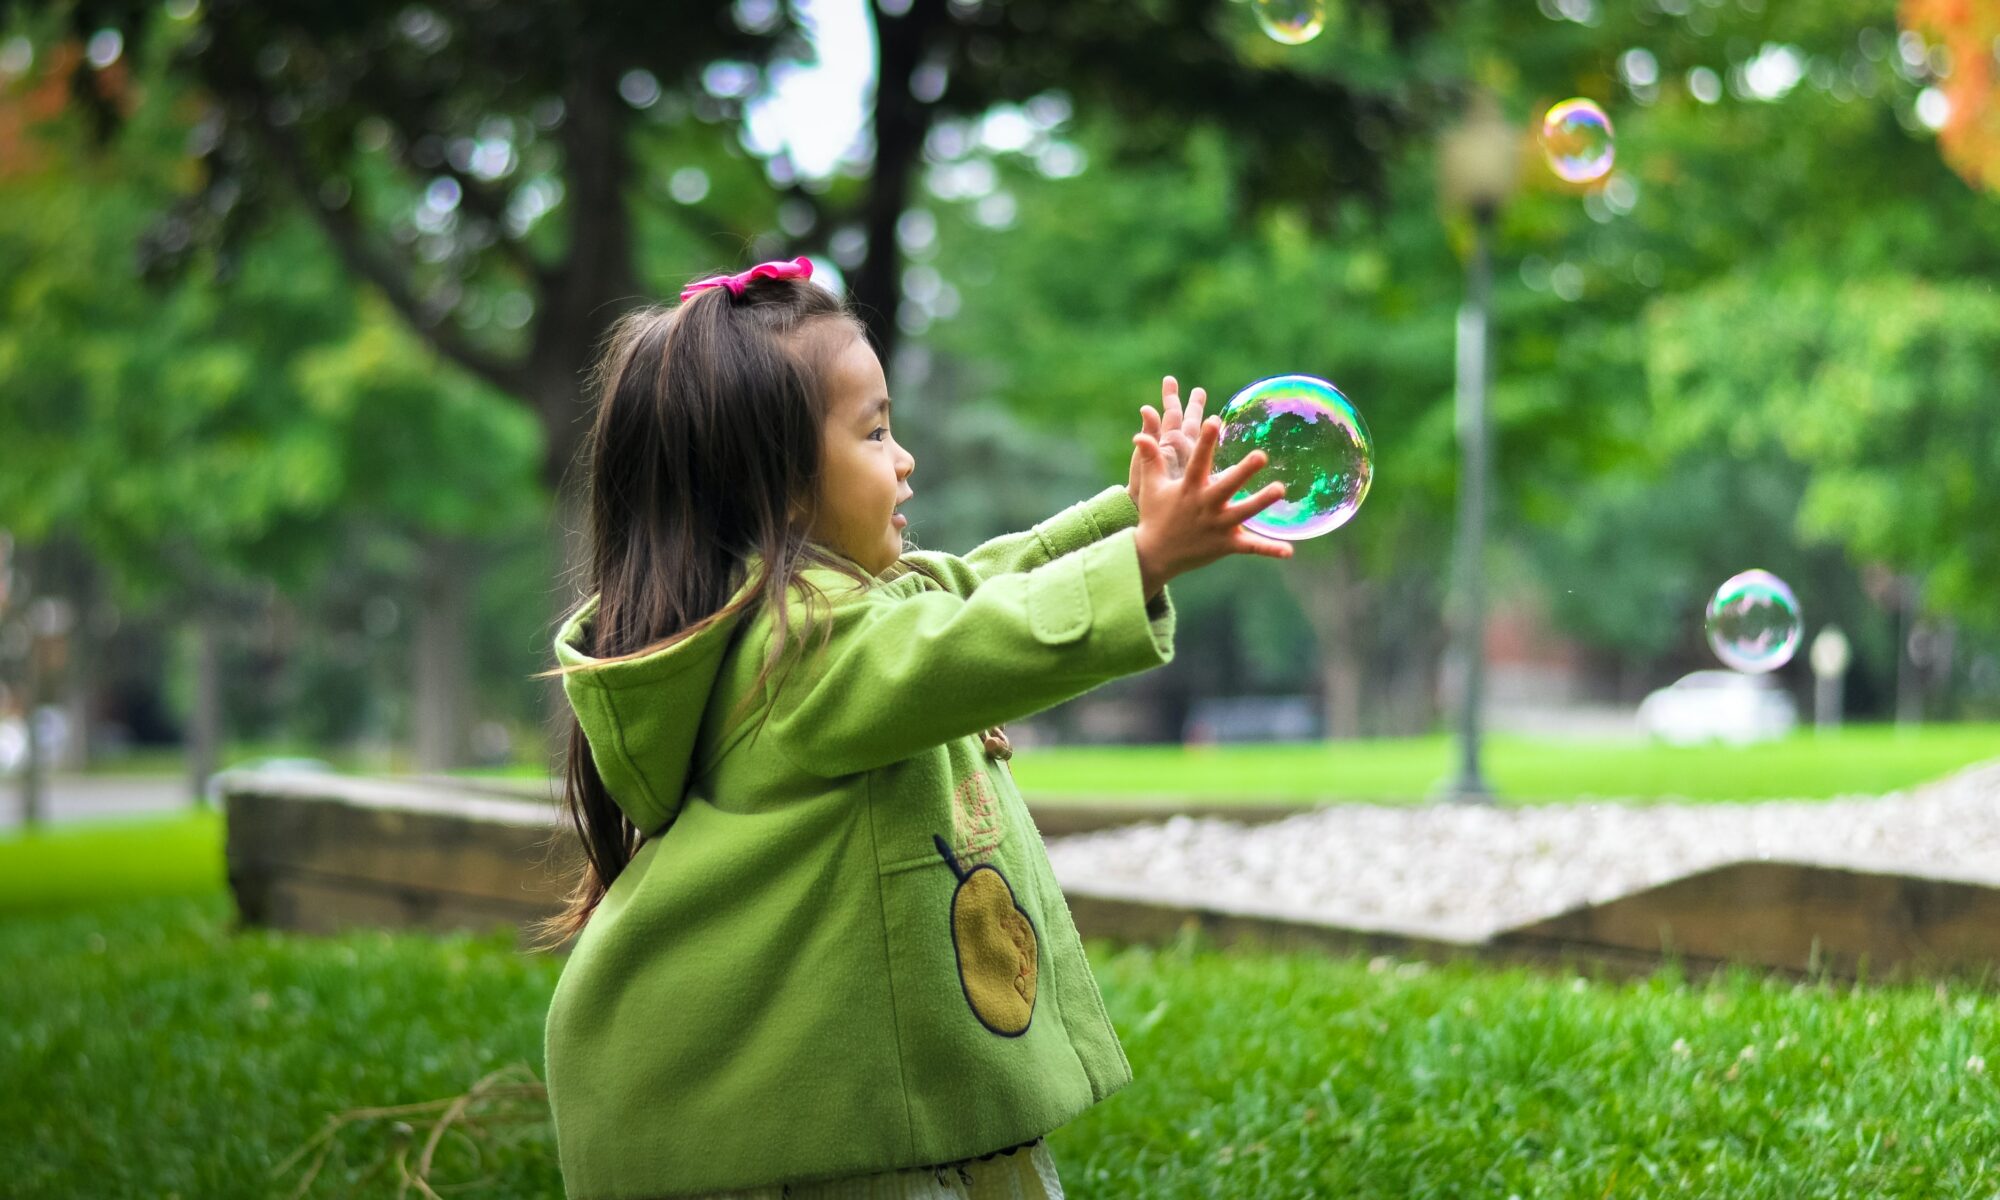 A young girl catching a bubble outside